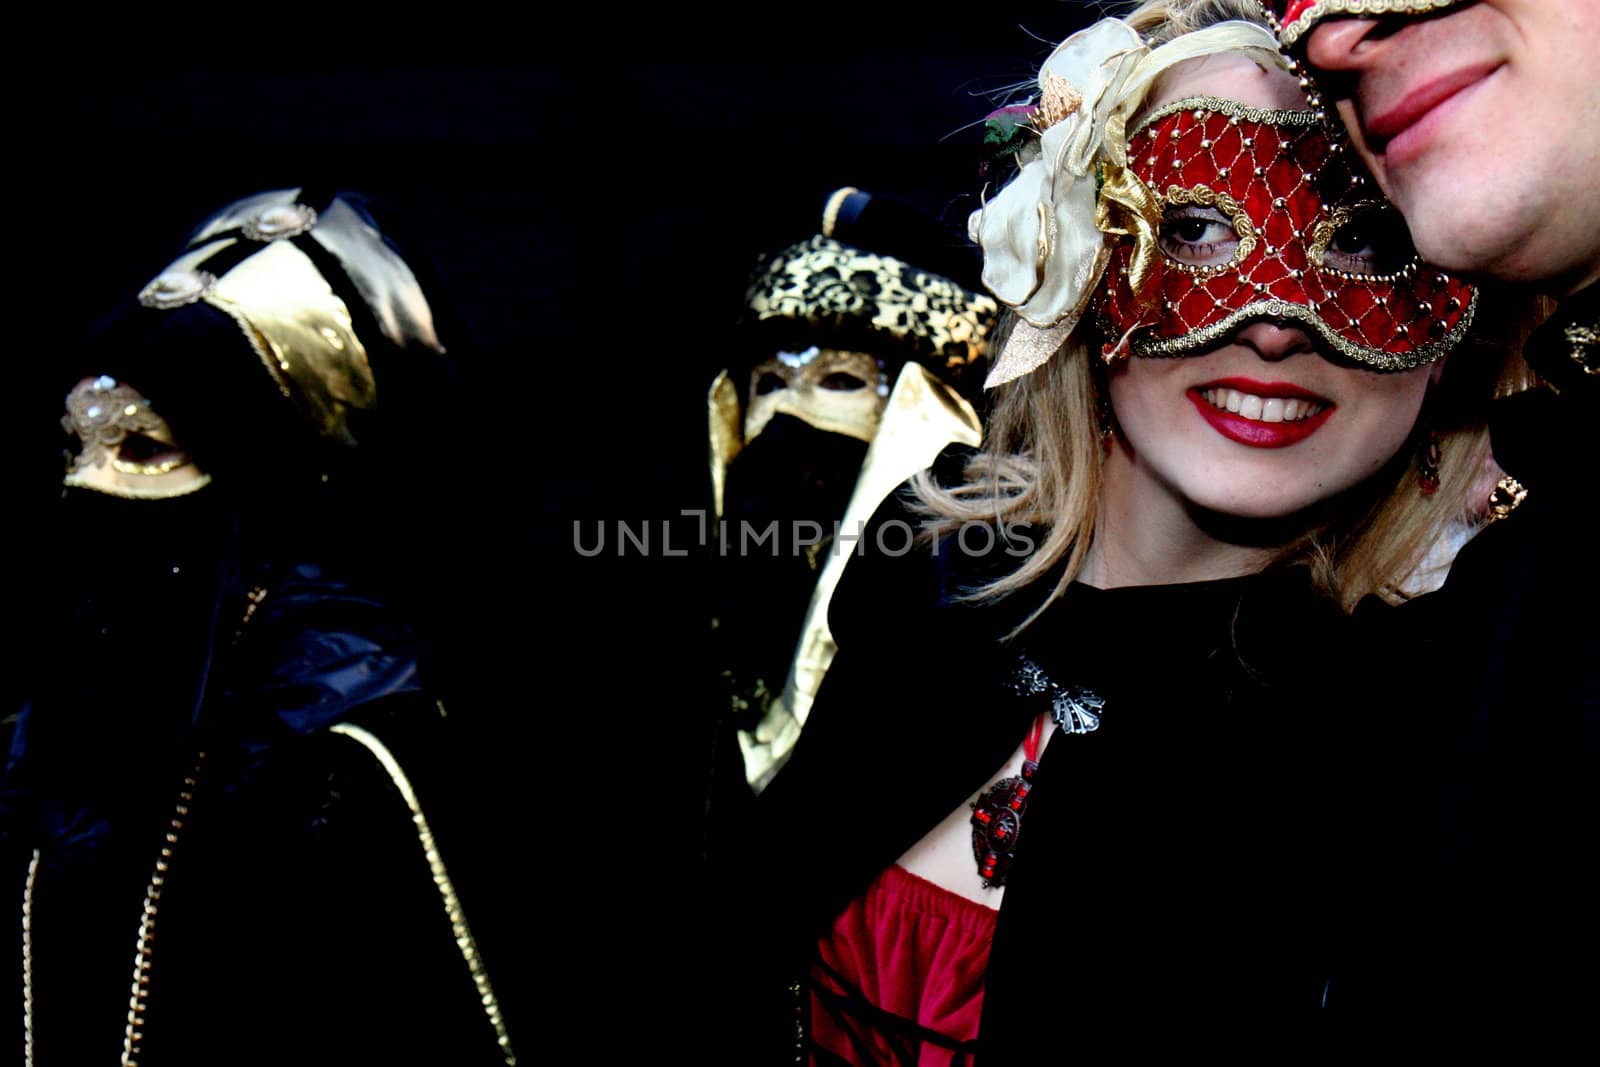 Lady with a red mask at Venice by allg